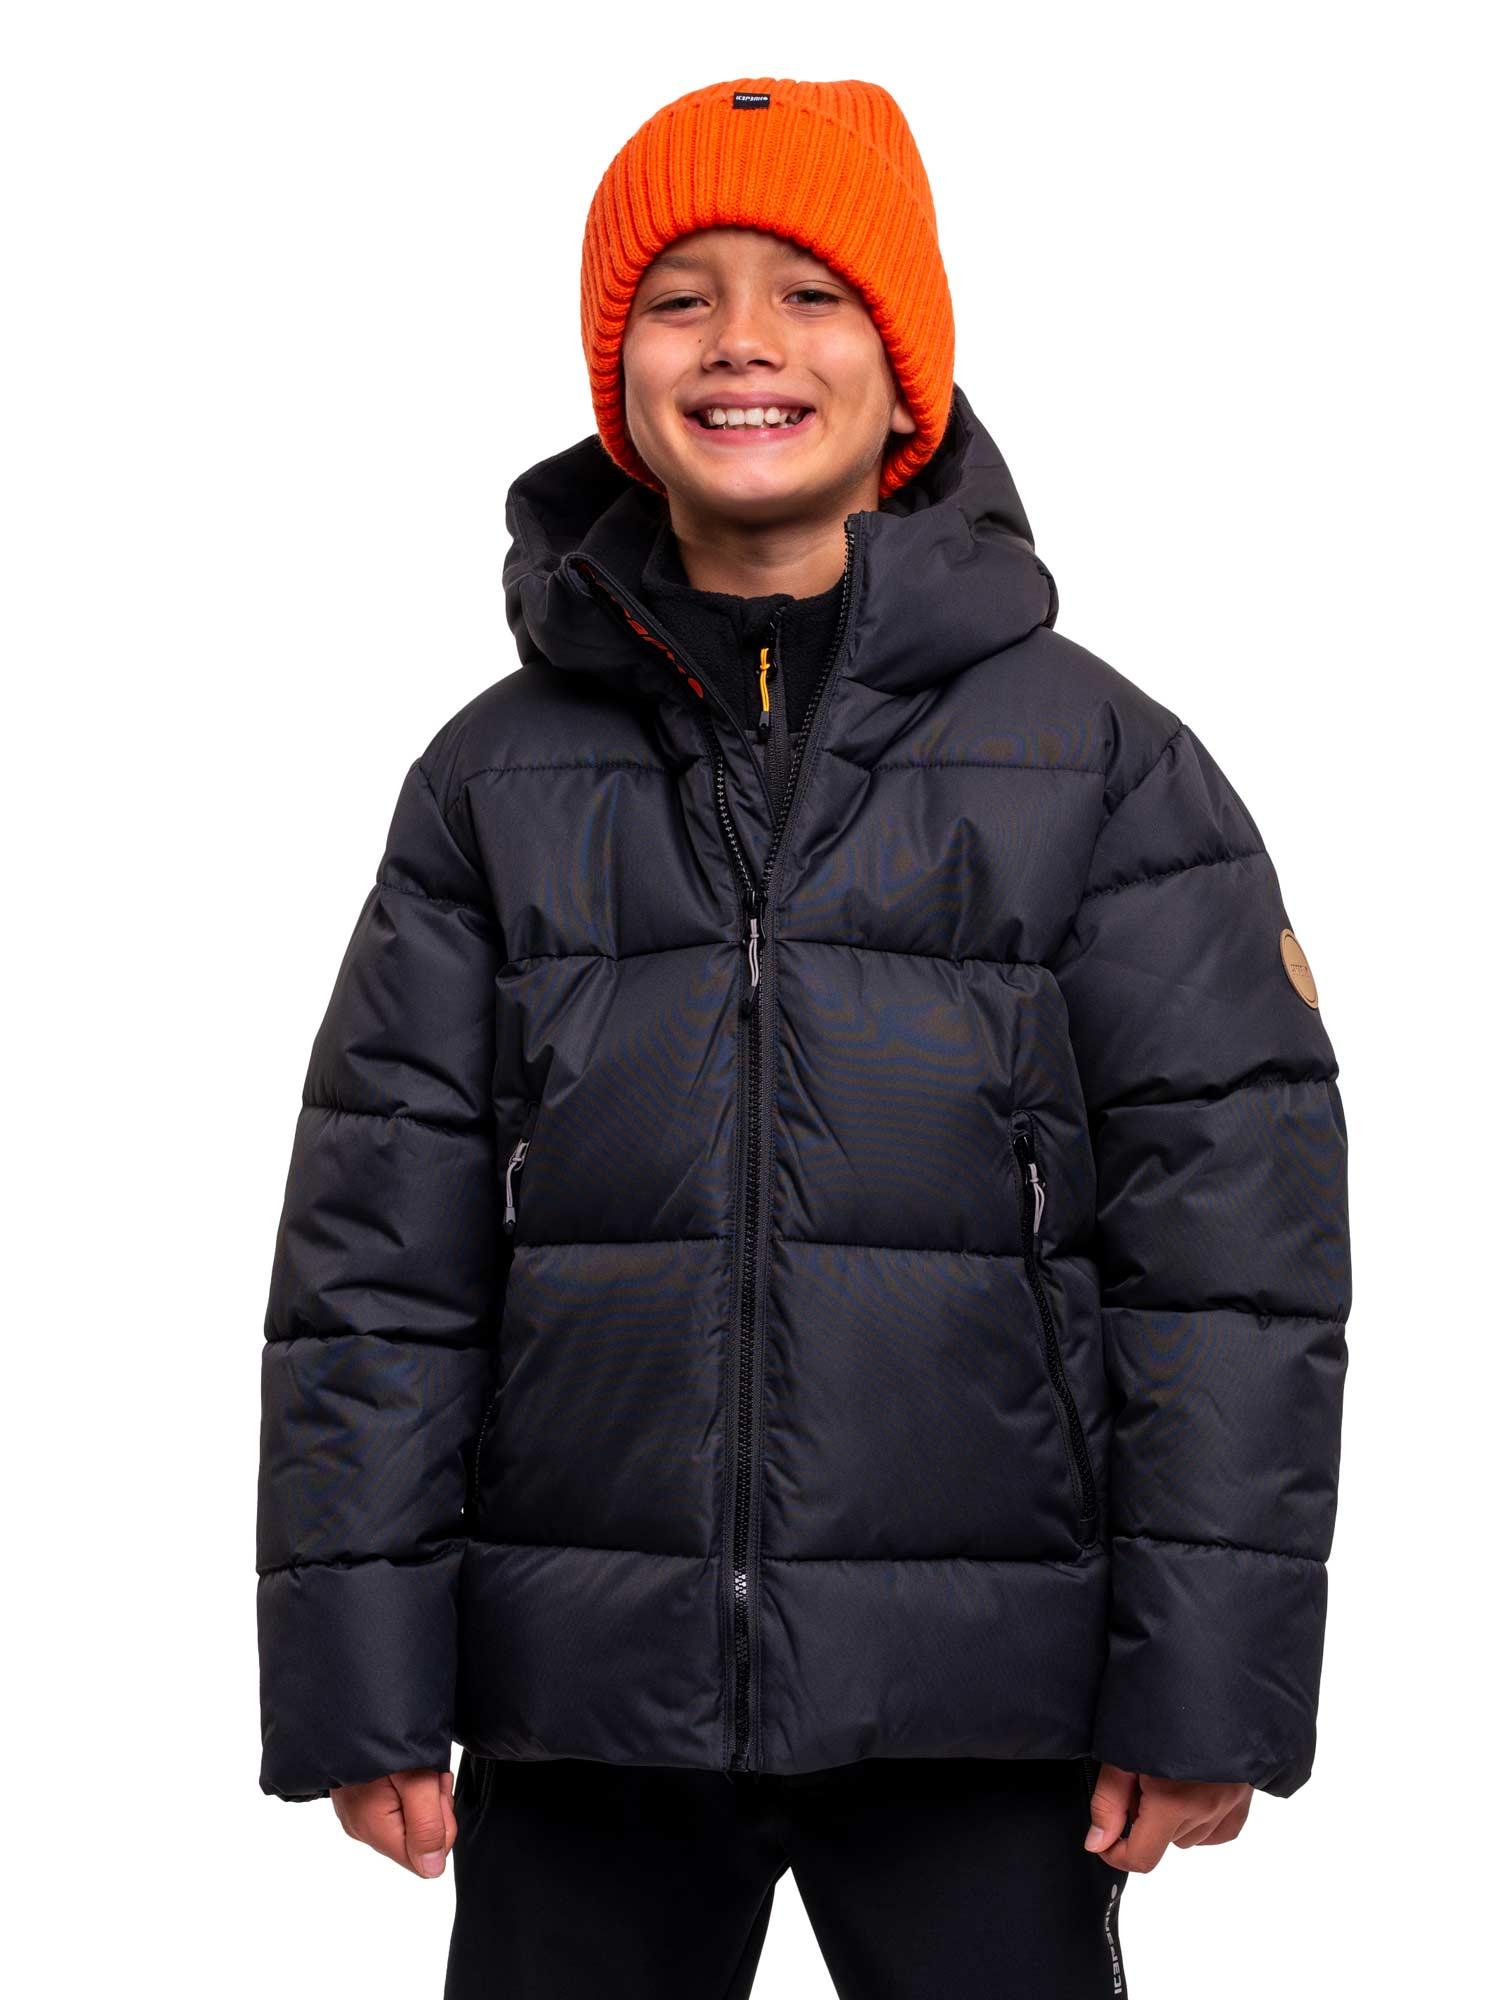 Selected image for ICEPEAK Јакна Kenmare Boys 4-50001-501 Црна